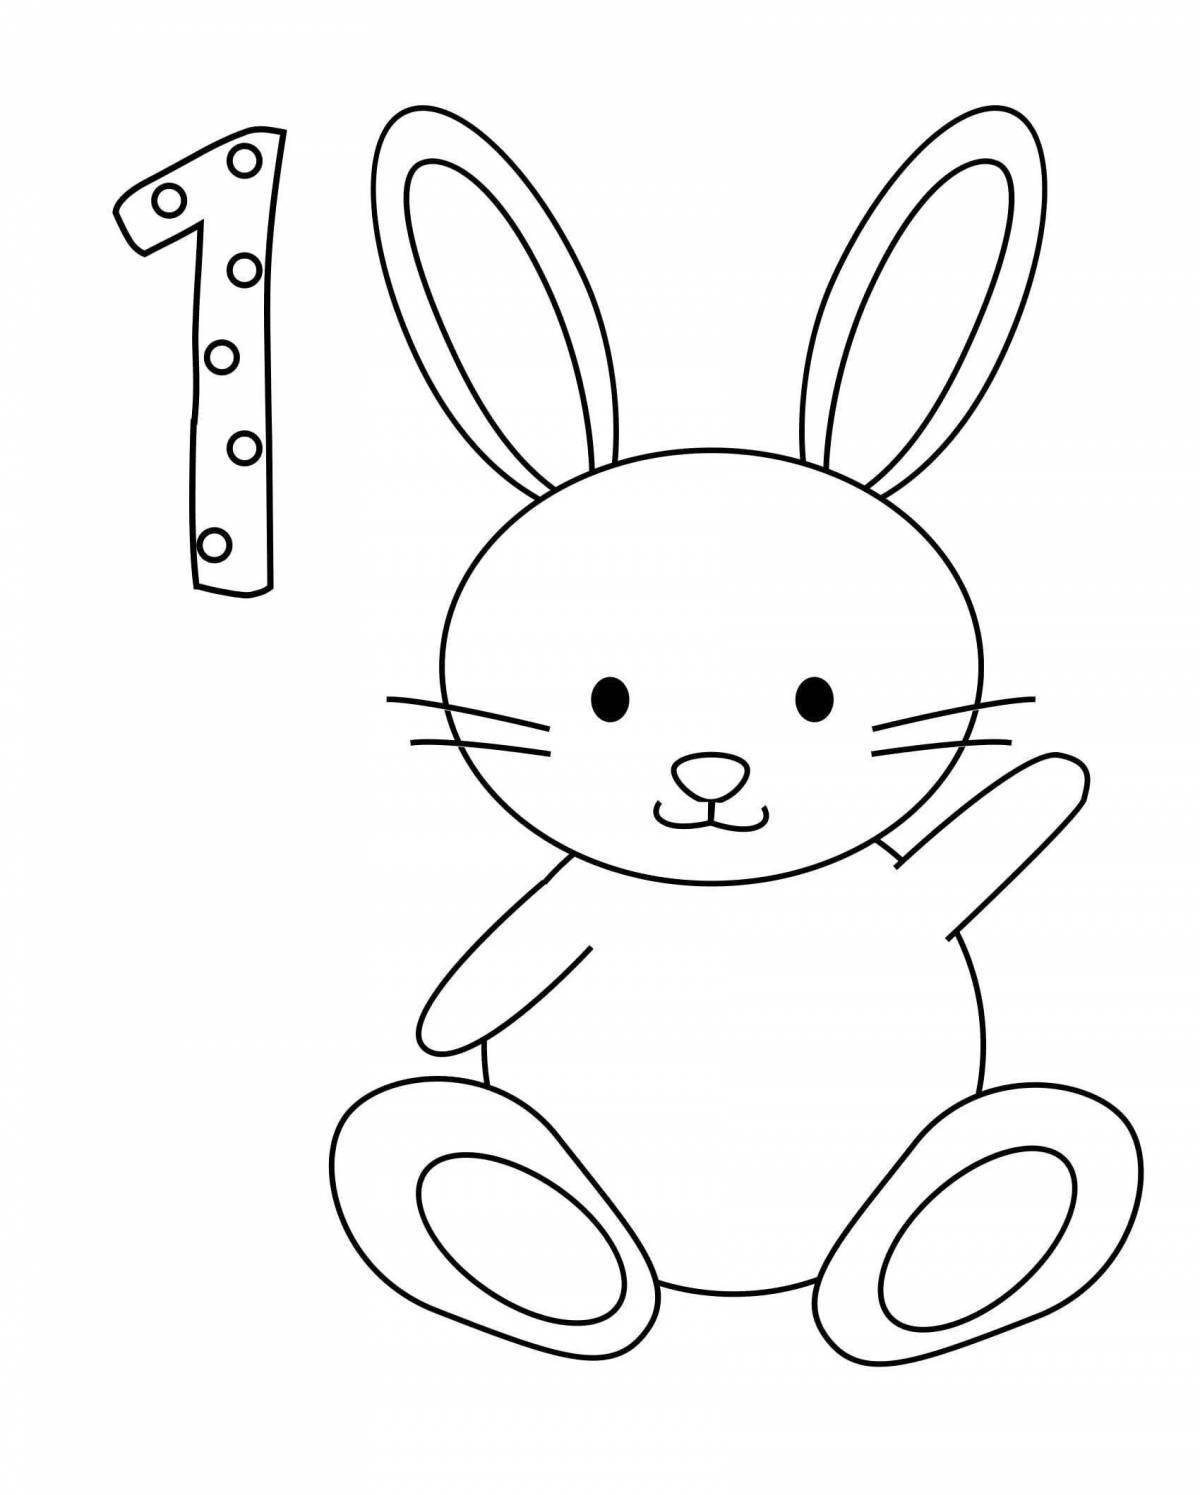 Fairytale rabbit coloring book for children 2-3 years old